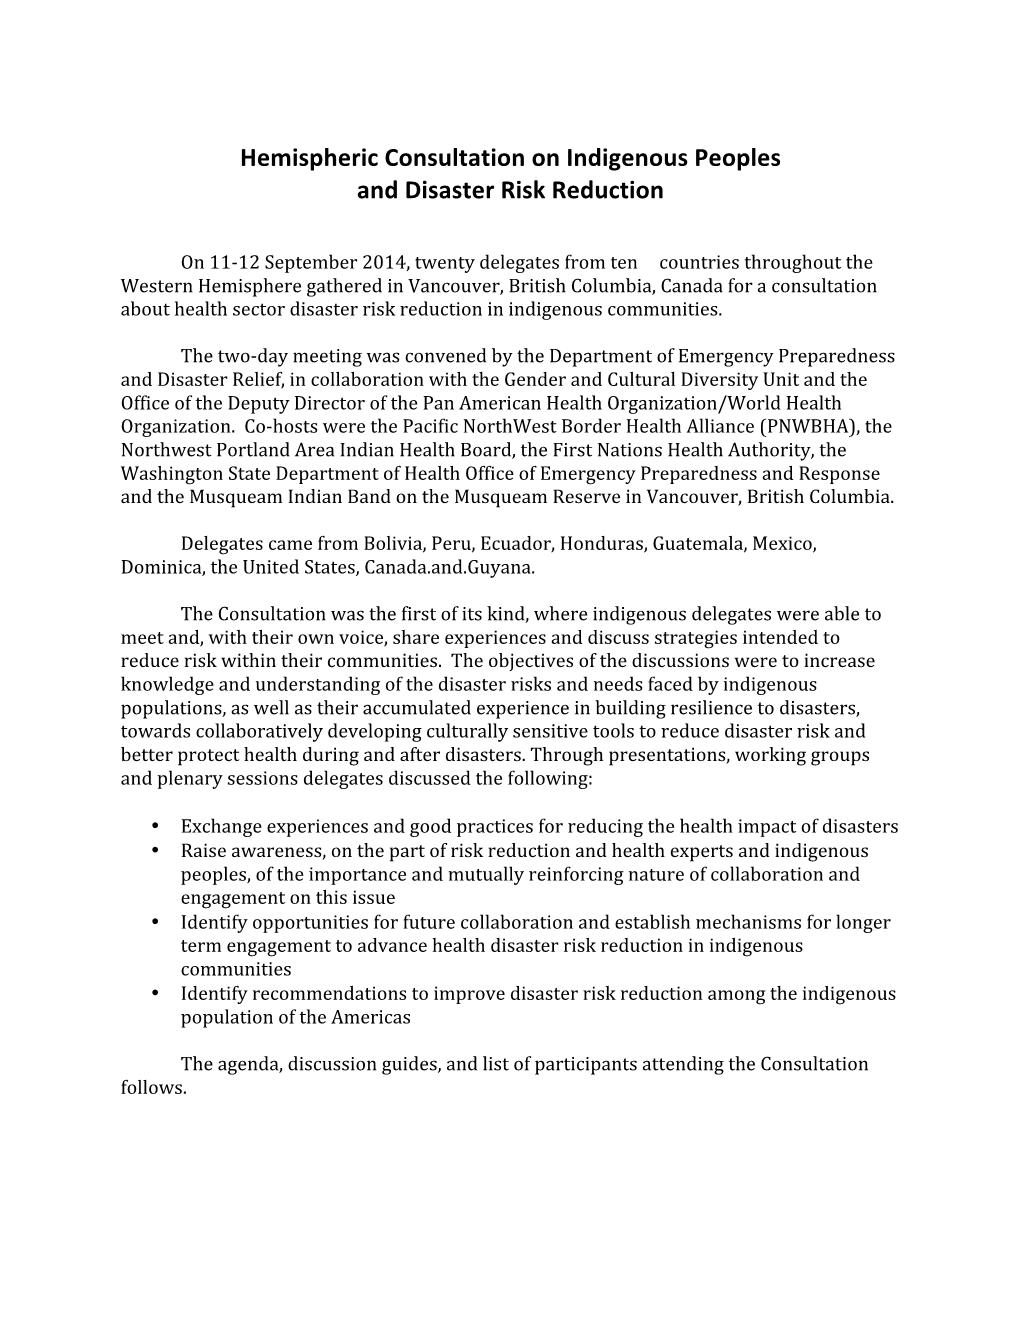 Hemispheric Consultation on Indigenous Peoples and Disaster Risk Reduction